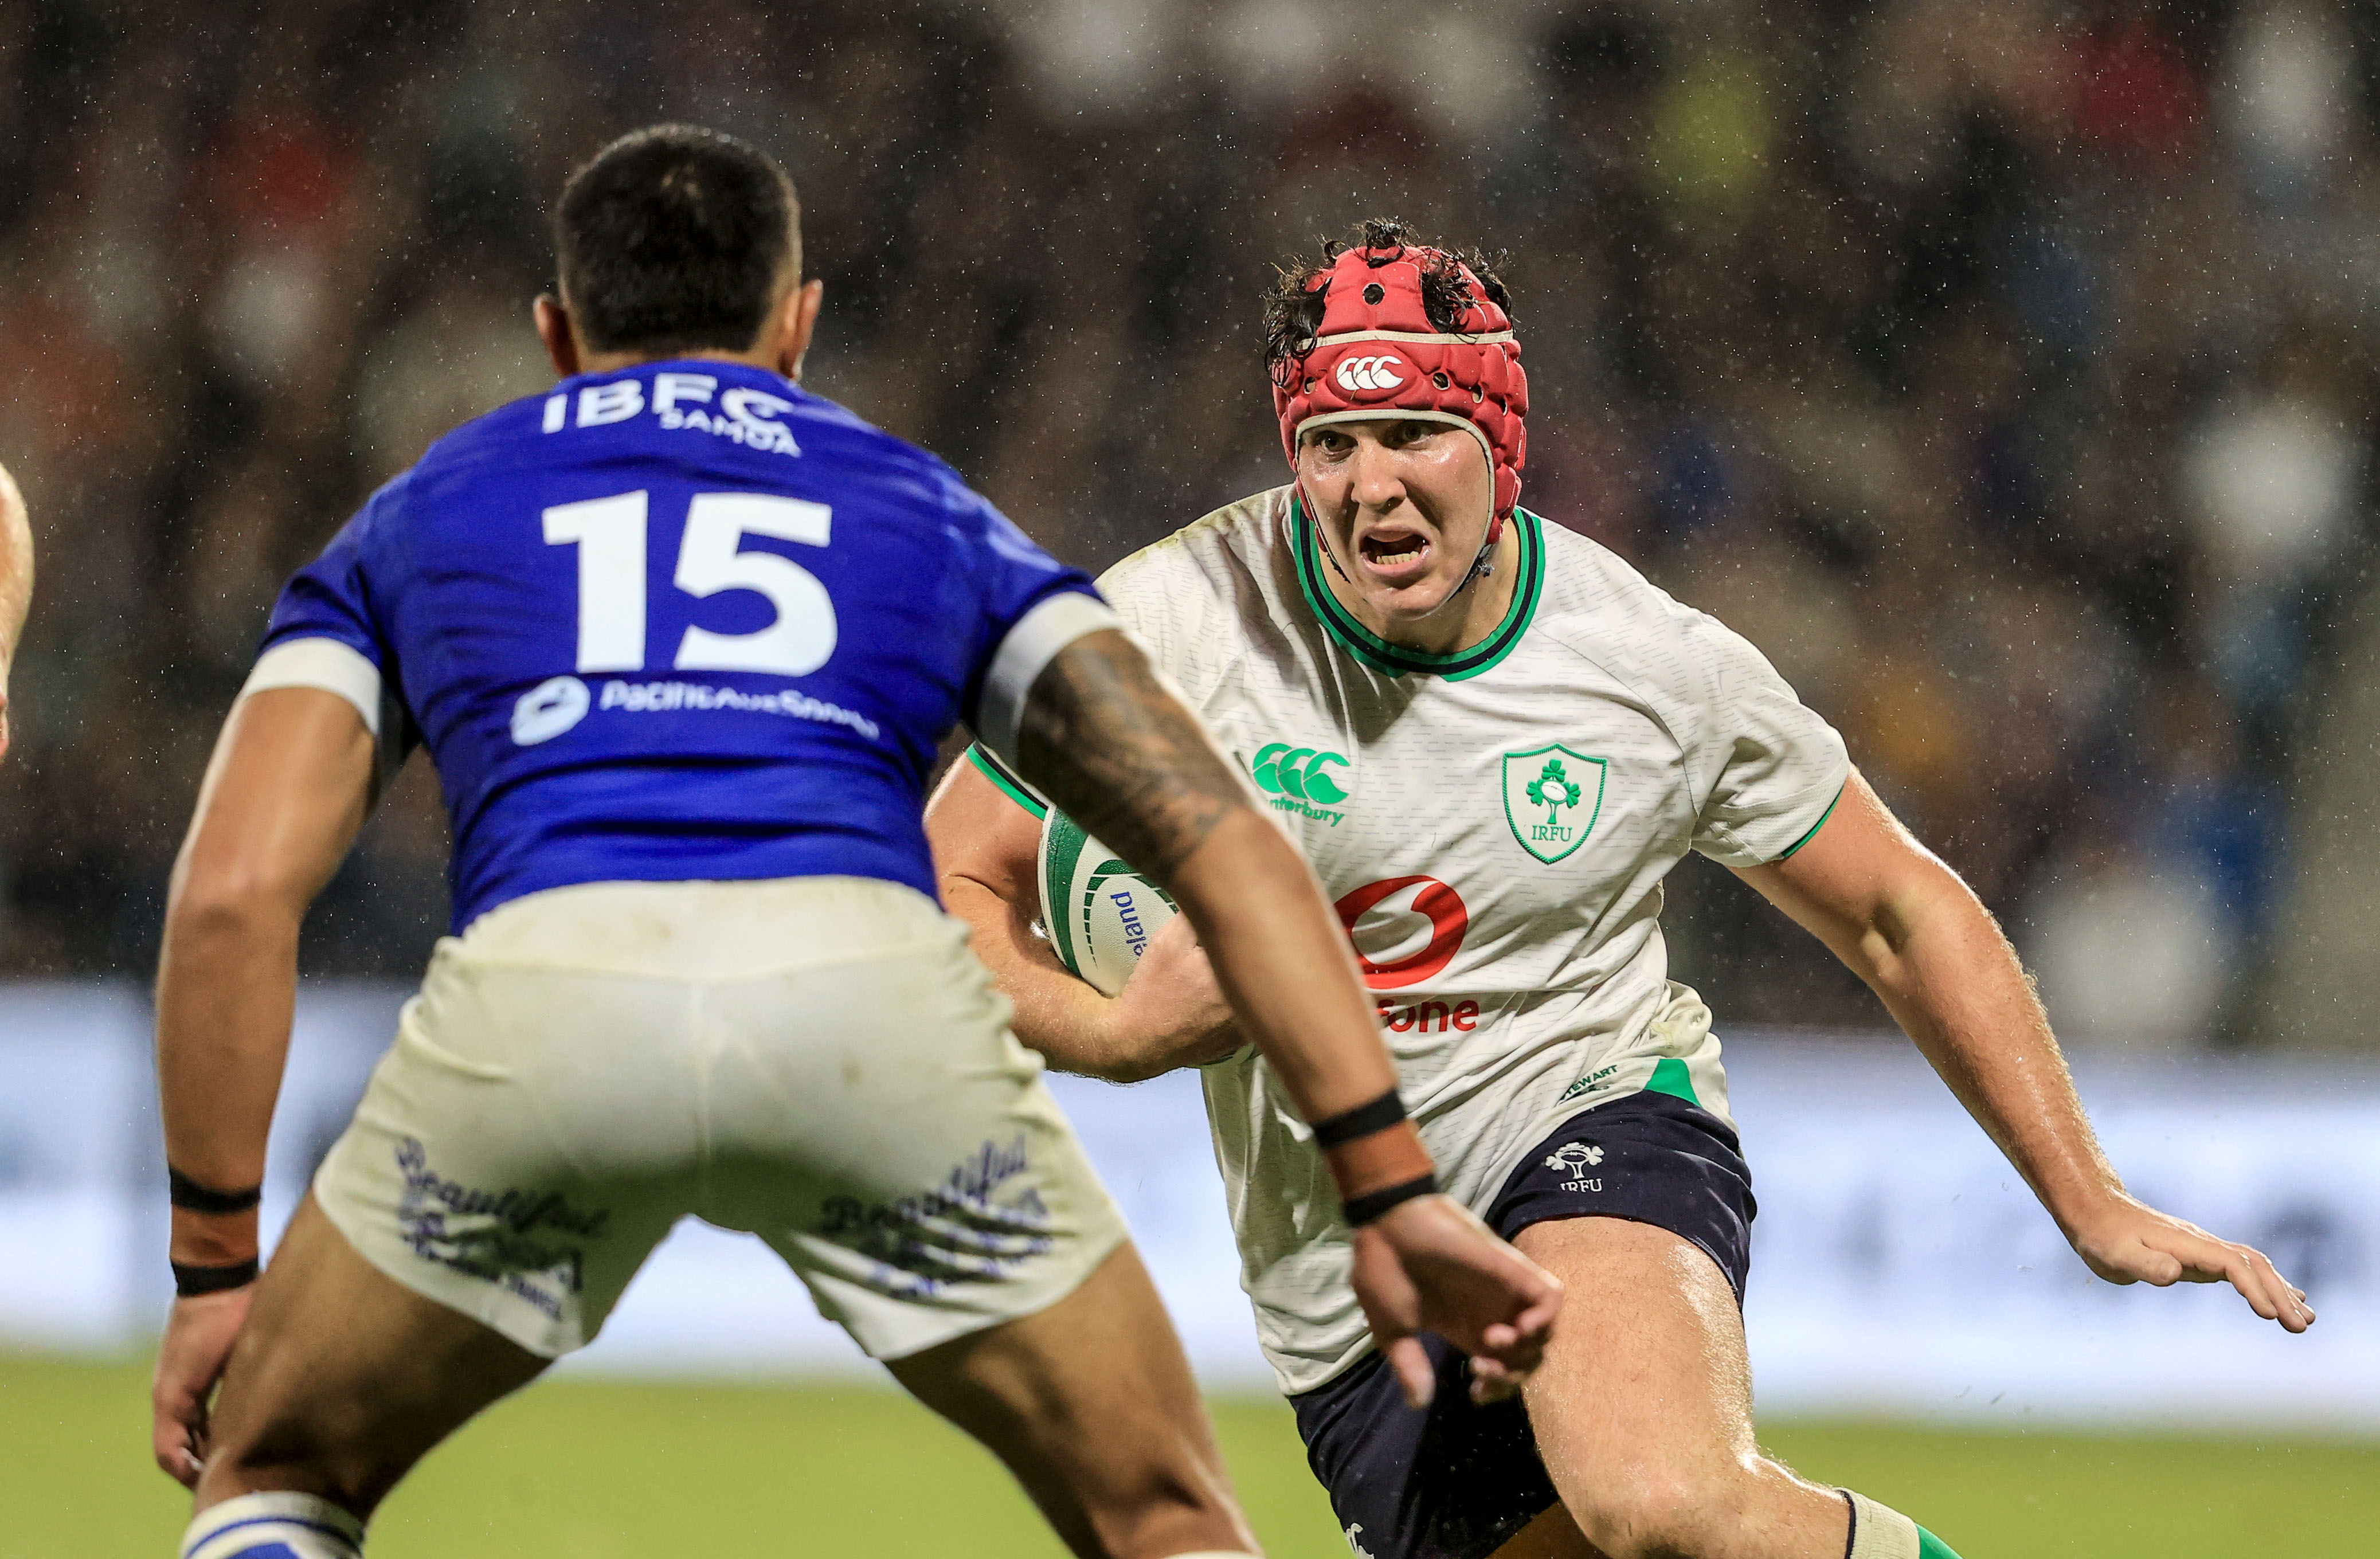 Ireland defeat Samoa in final warm-up - as it happened - Live